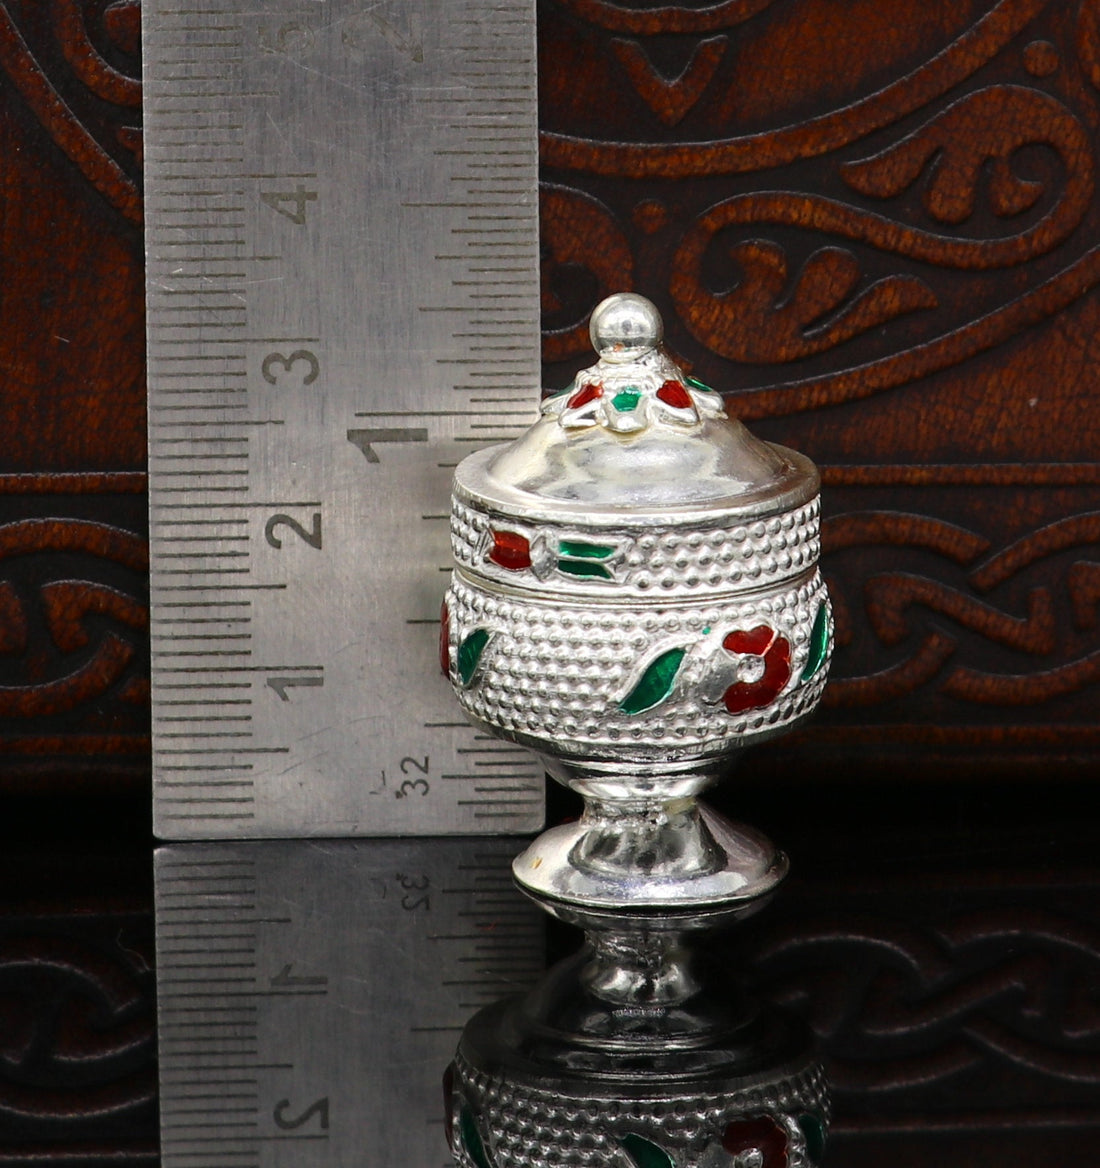 925 Sterling silver handmade fabulous trinket box, solid container box, casket box, sindoor box, enamel work customized gifting box stb91 - TRIBAL ORNAMENTS